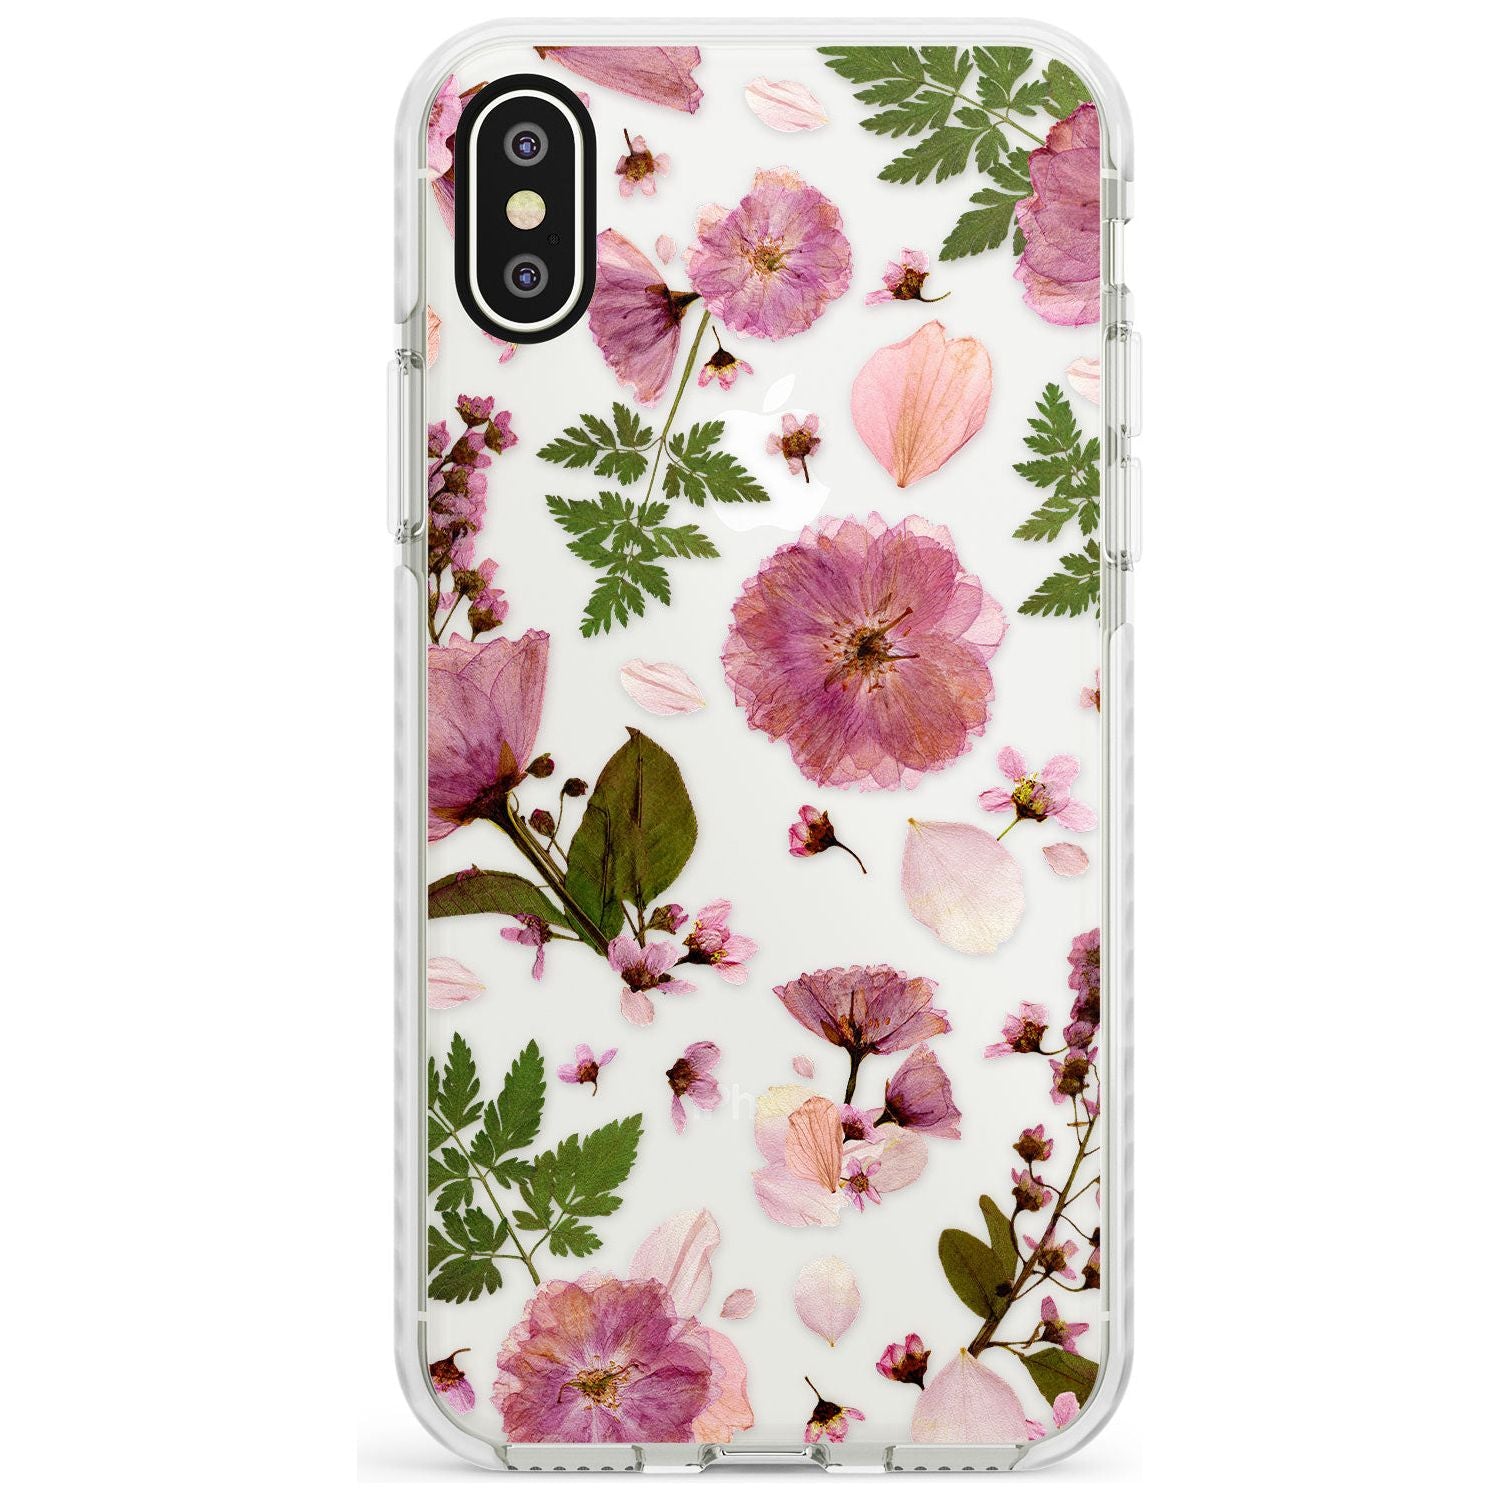 Natural Arrangement of Flowers & Leaves Design Impact Phone Case for iPhone X XS Max XR